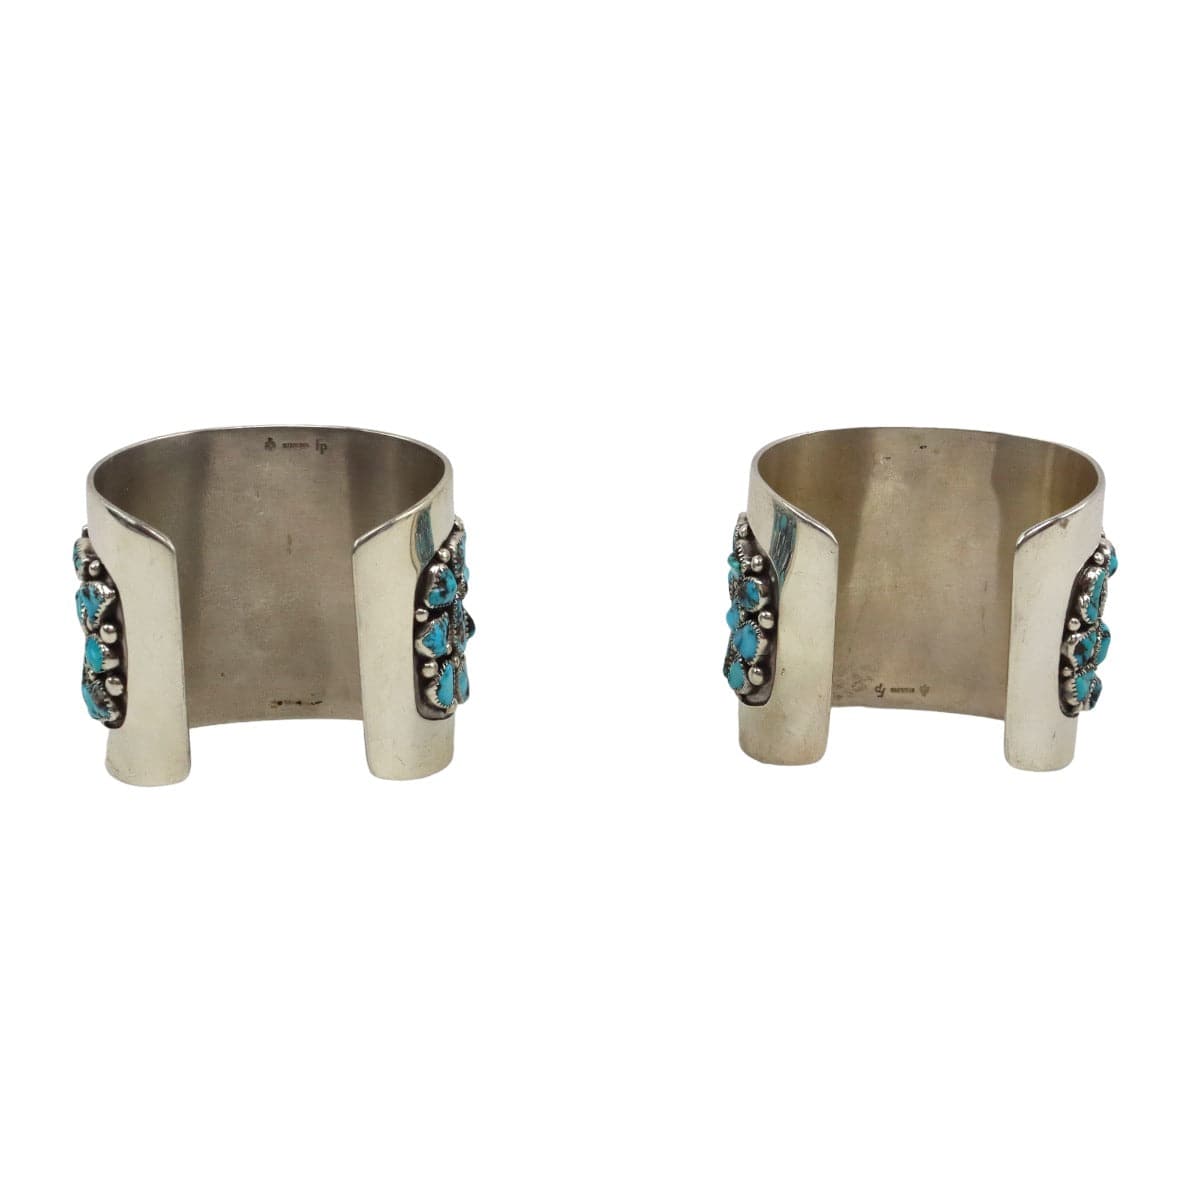 Frank Patania Sr. (1898-1964) - Pair of Burnham Turquoise Nugget and Silver Cuffs c. 1950, size 6.5 each (J91699-1022-004) 2